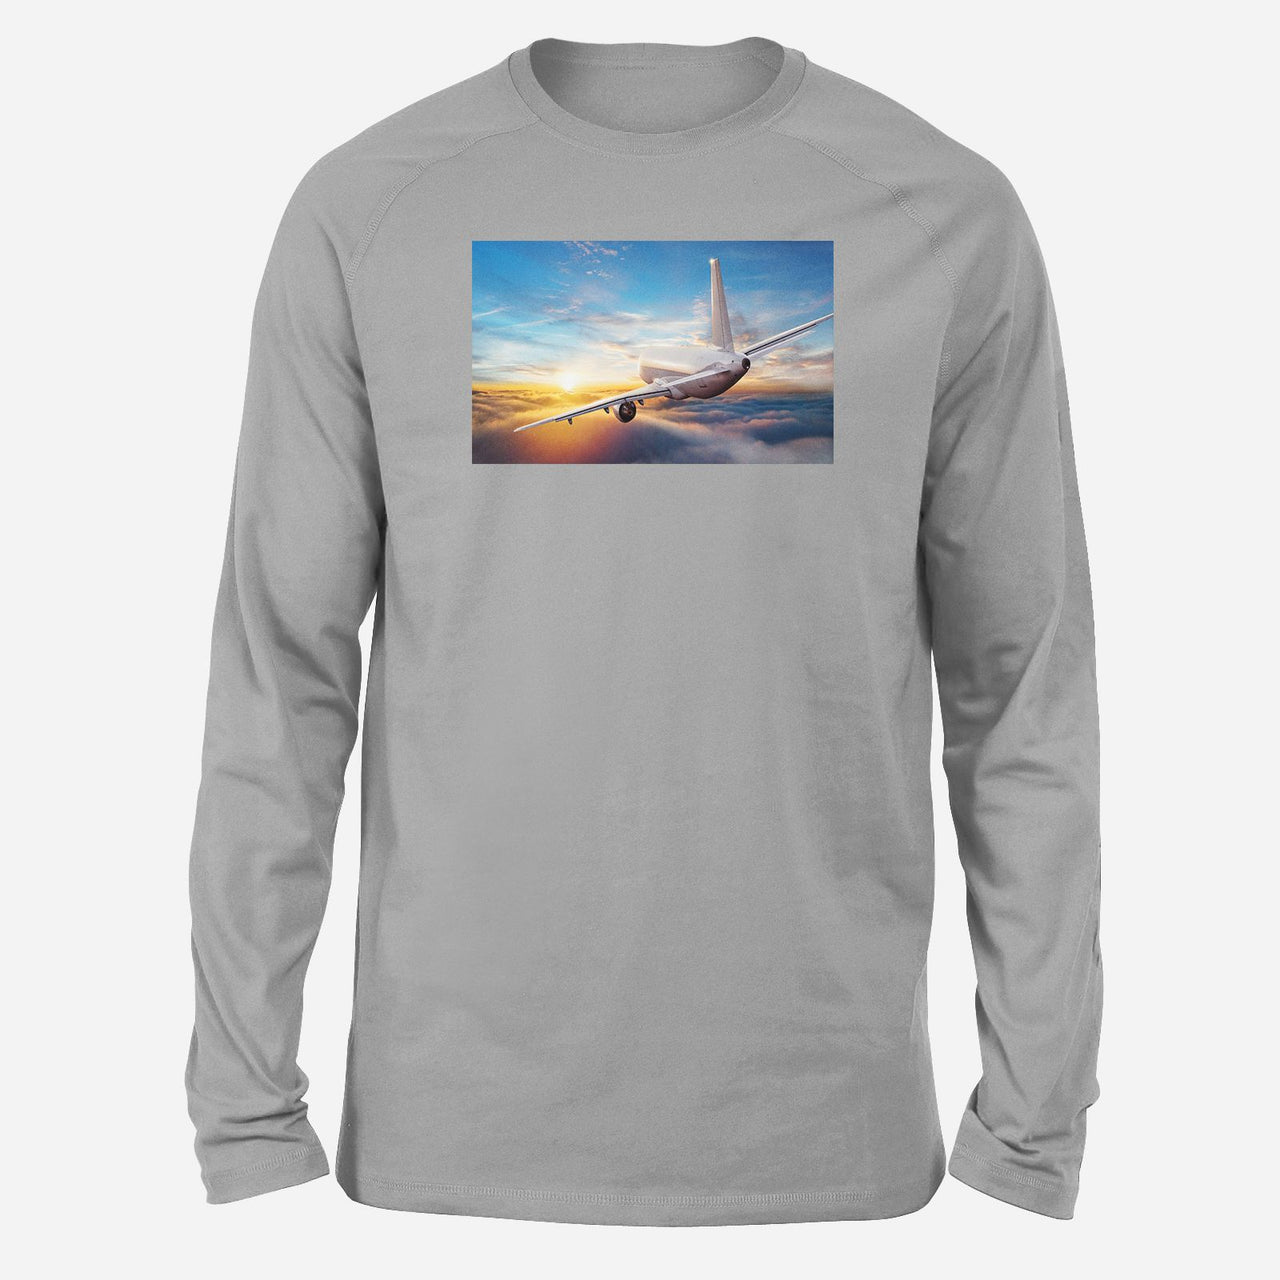 Airliner Jet Cruising over Clouds Designed Long-Sleeve T-Shirts